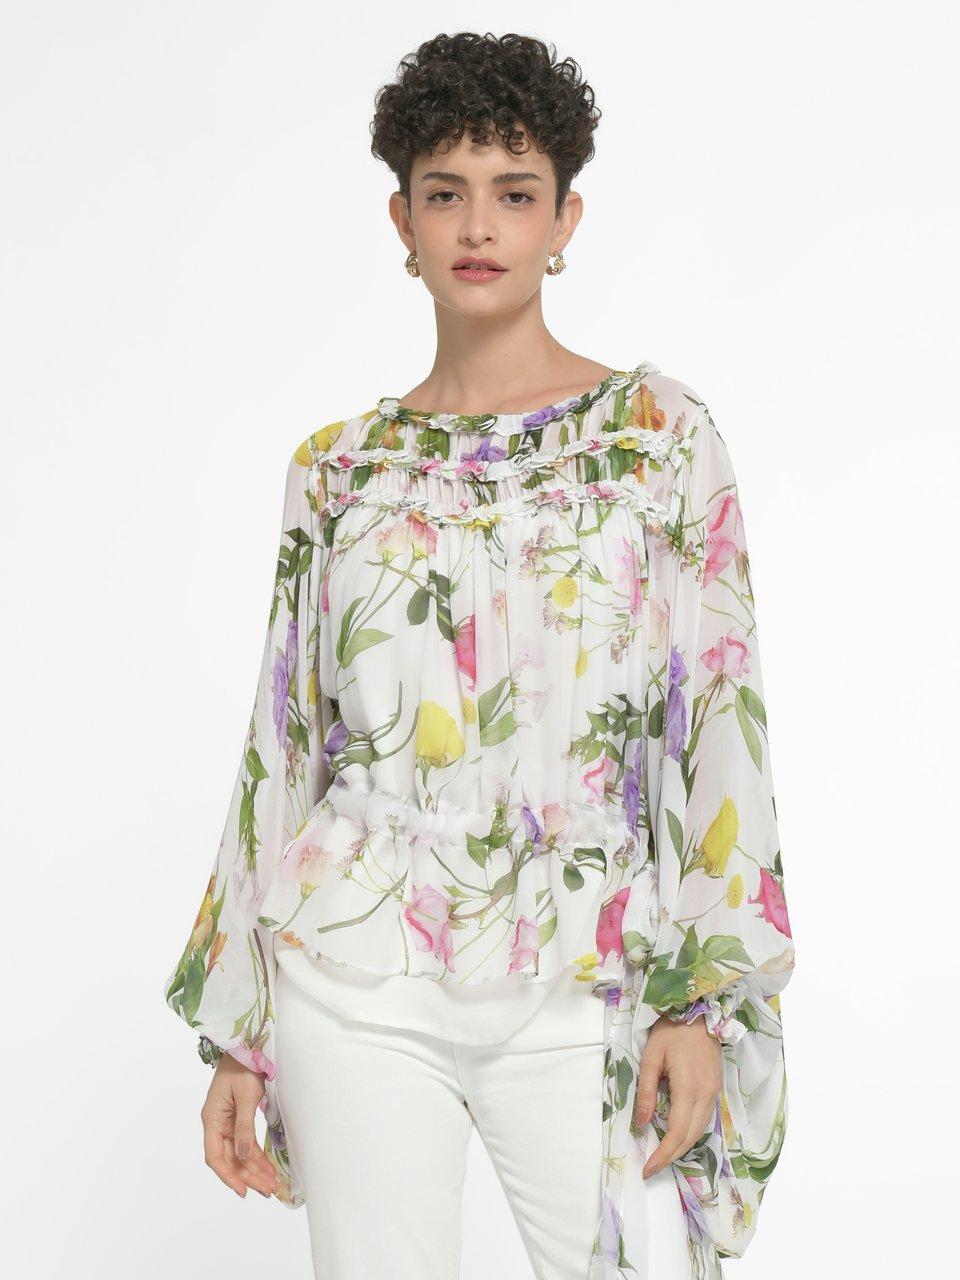 Ted Baker - Bluse - Weiß/Multicolor